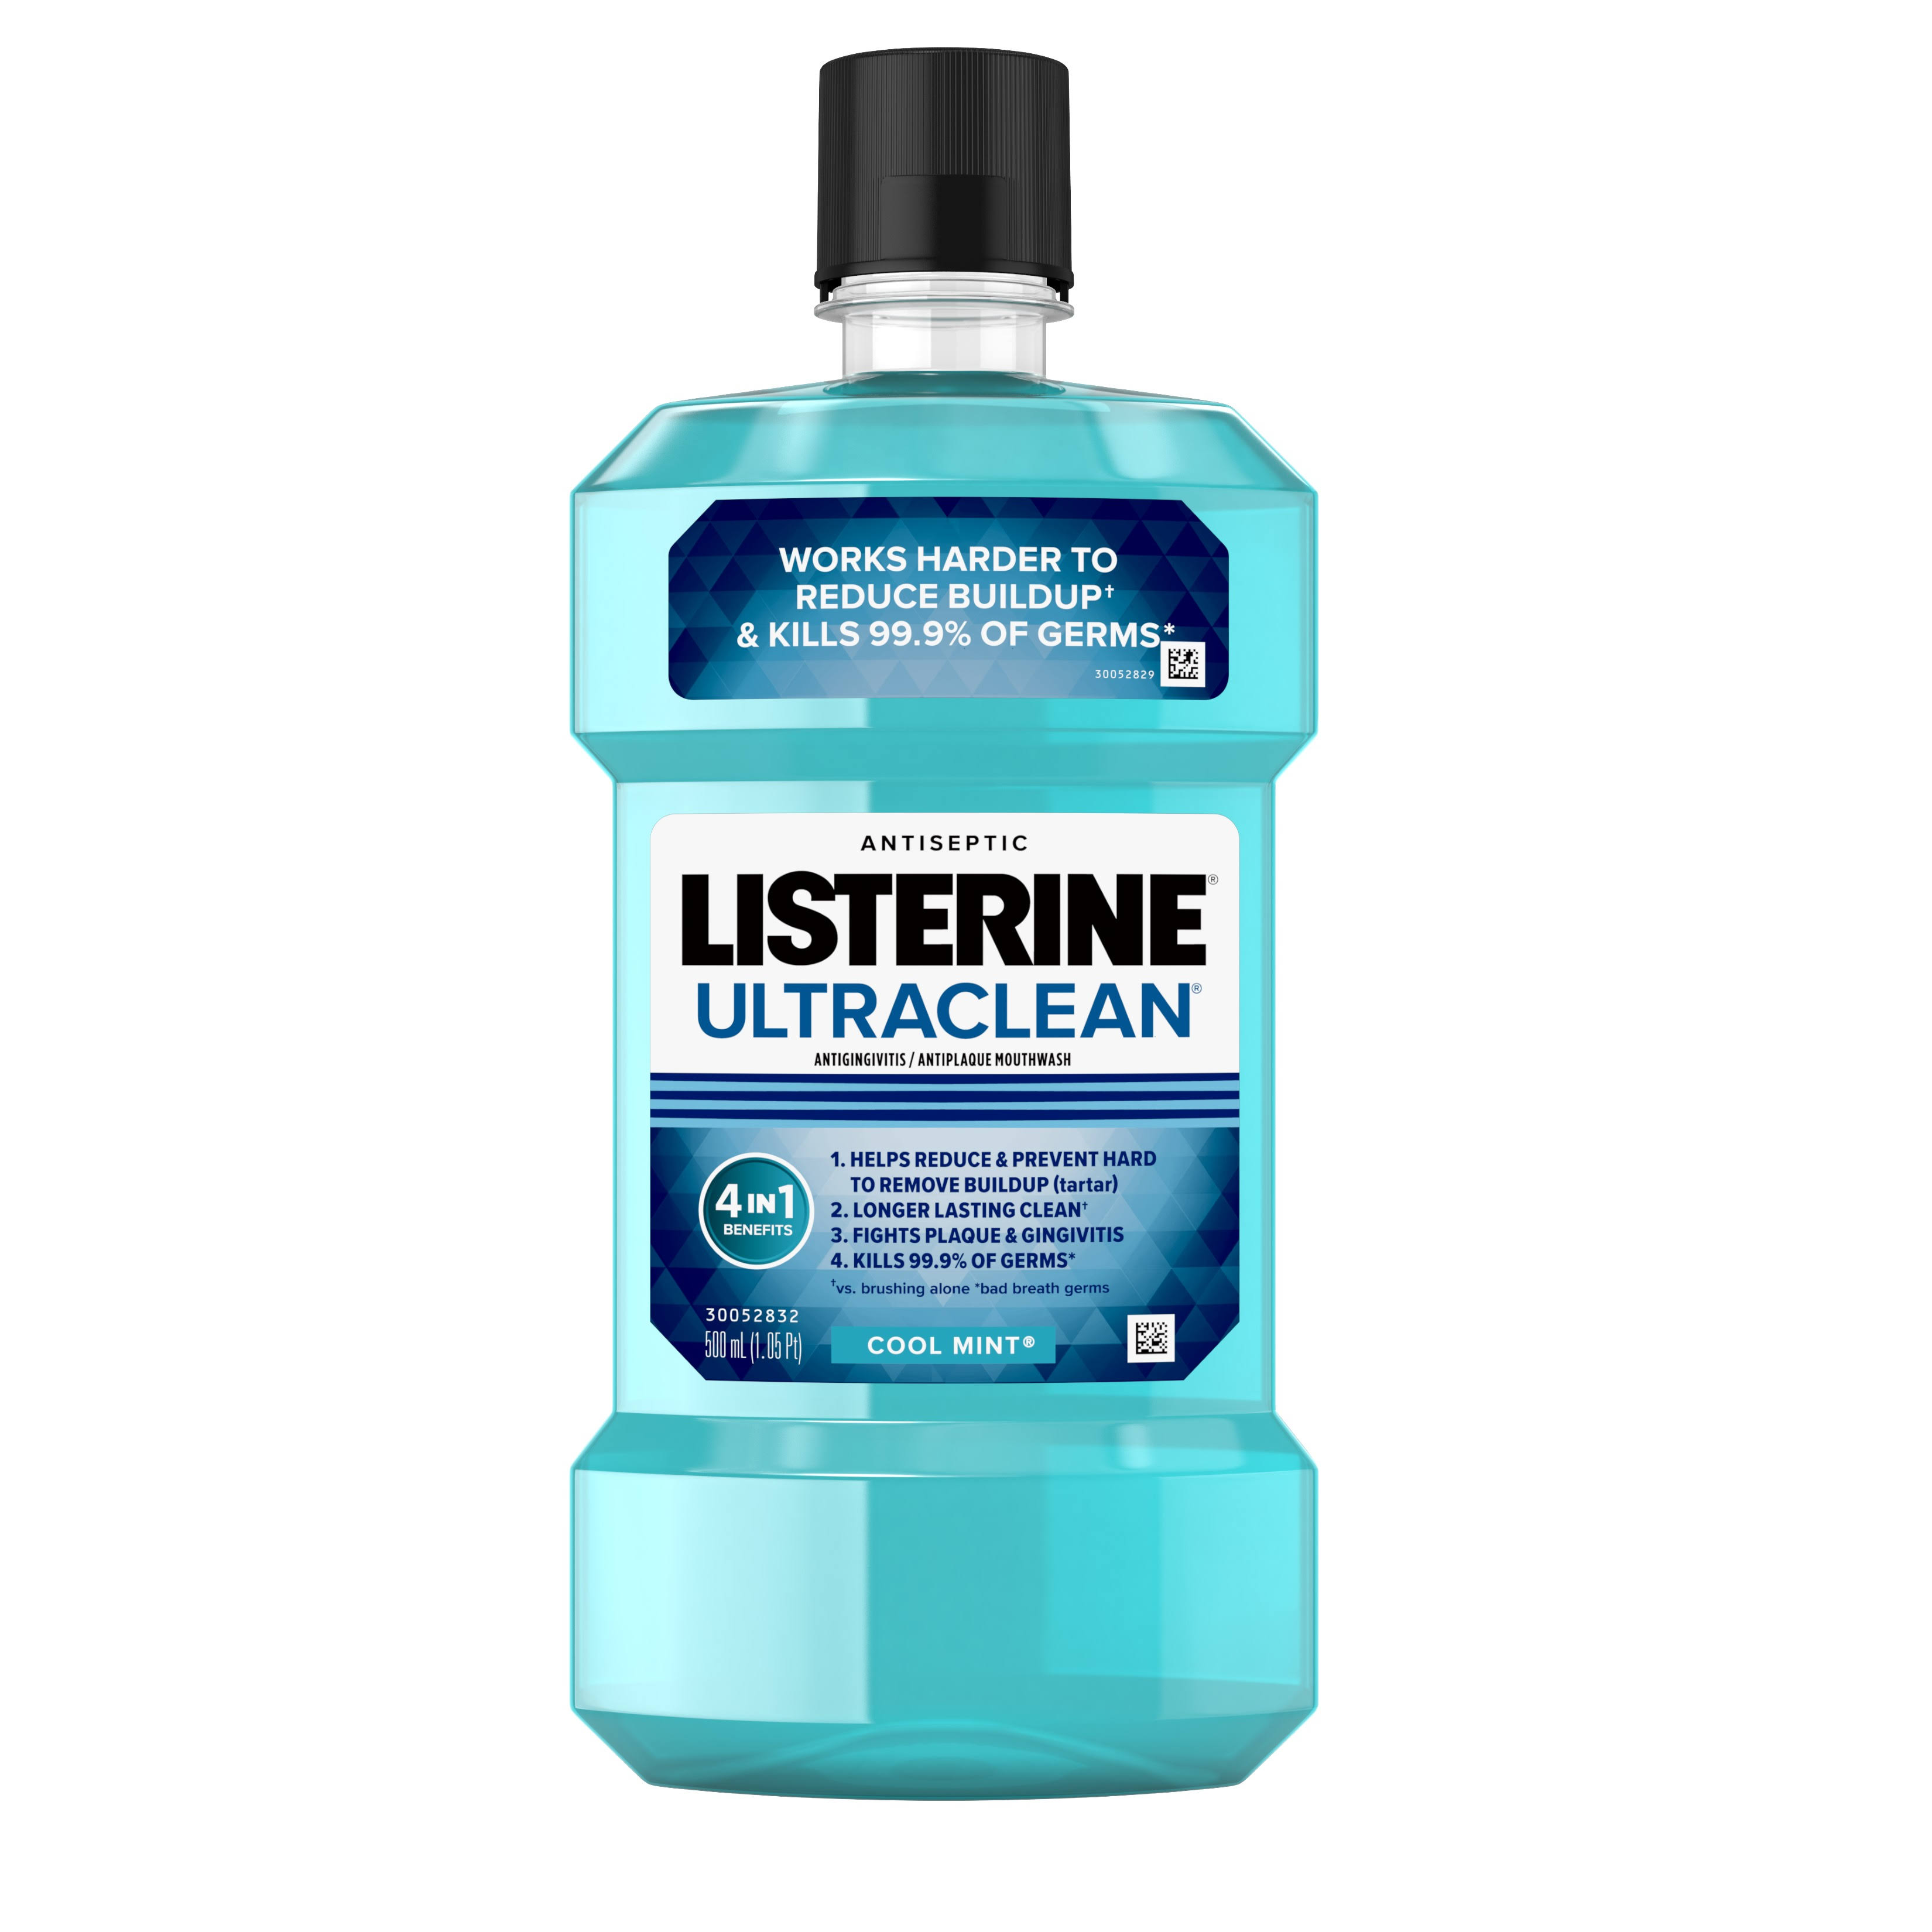 Listerine Ultraclean Antiseptic Mouthwash - Cool Mint, 500ml